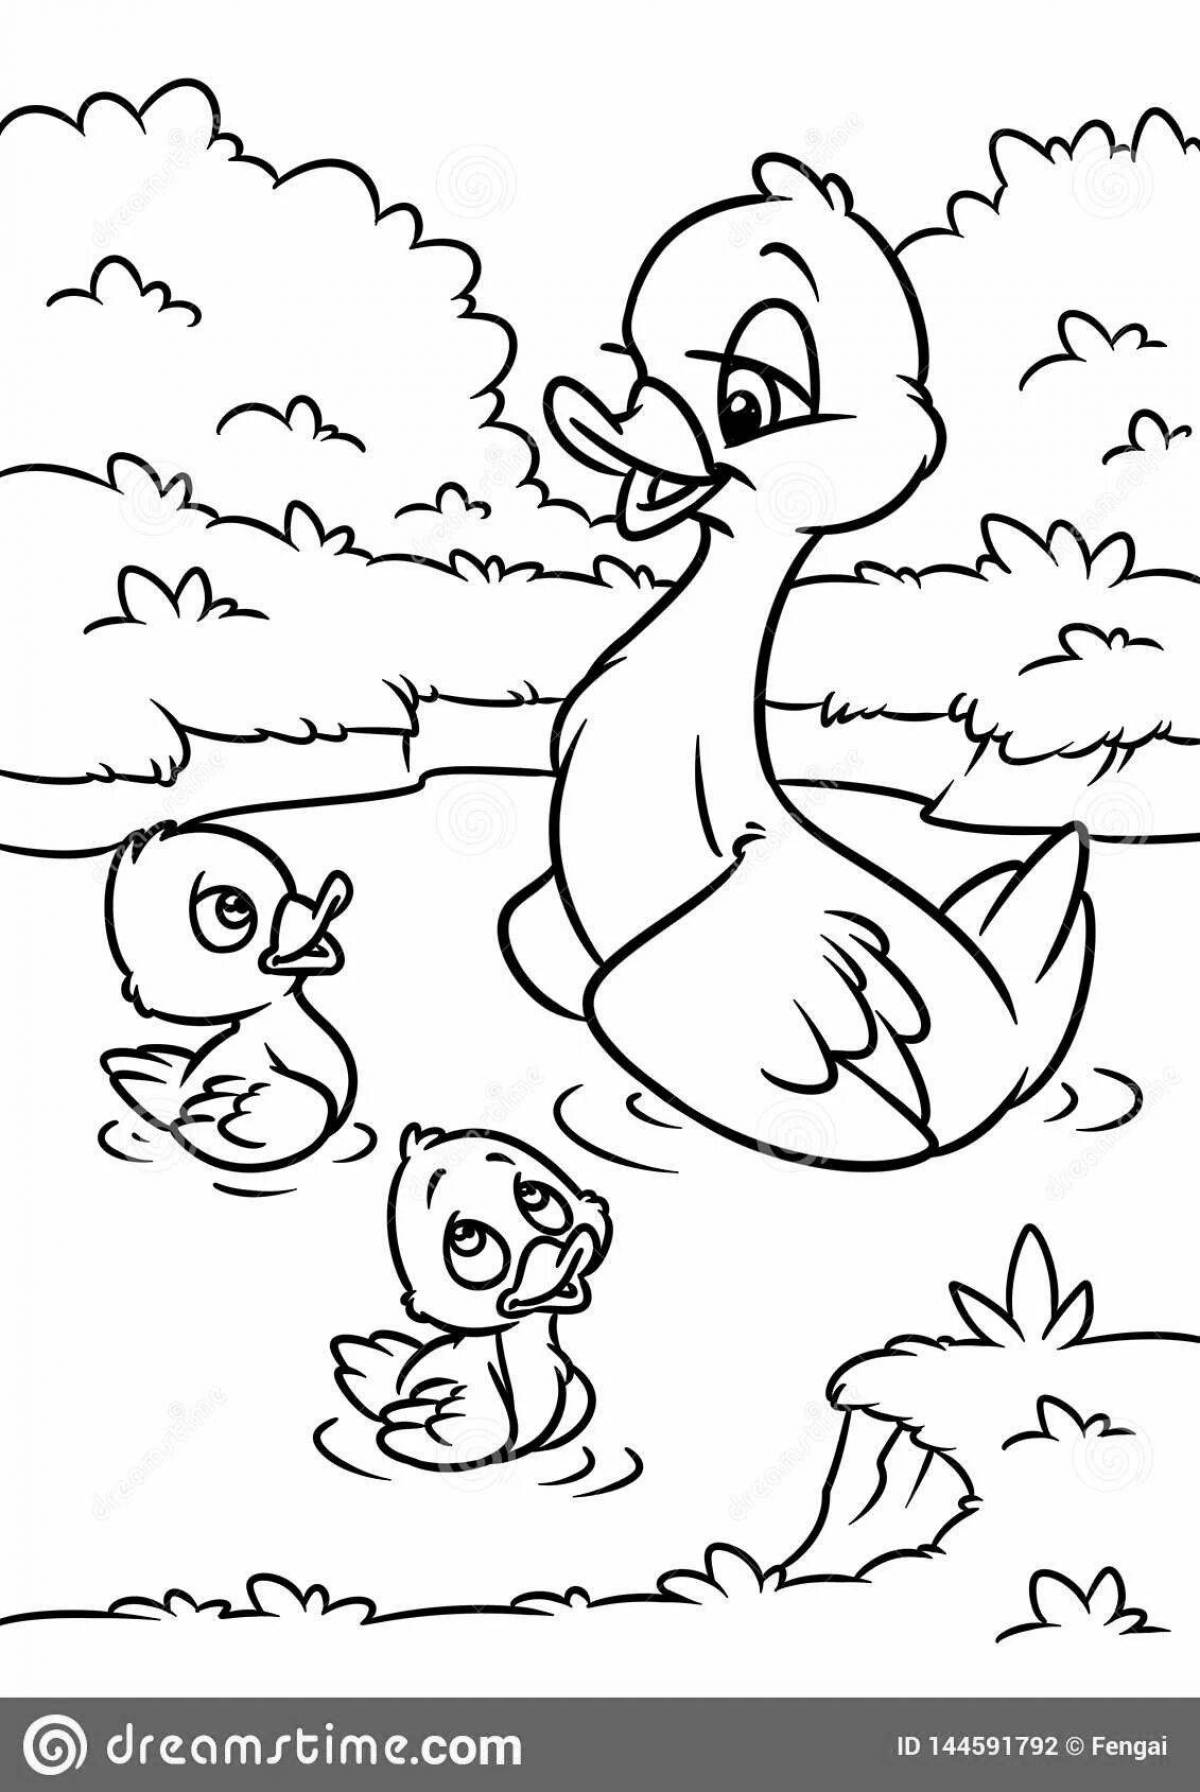 Adorable duck and duckling coloring pages